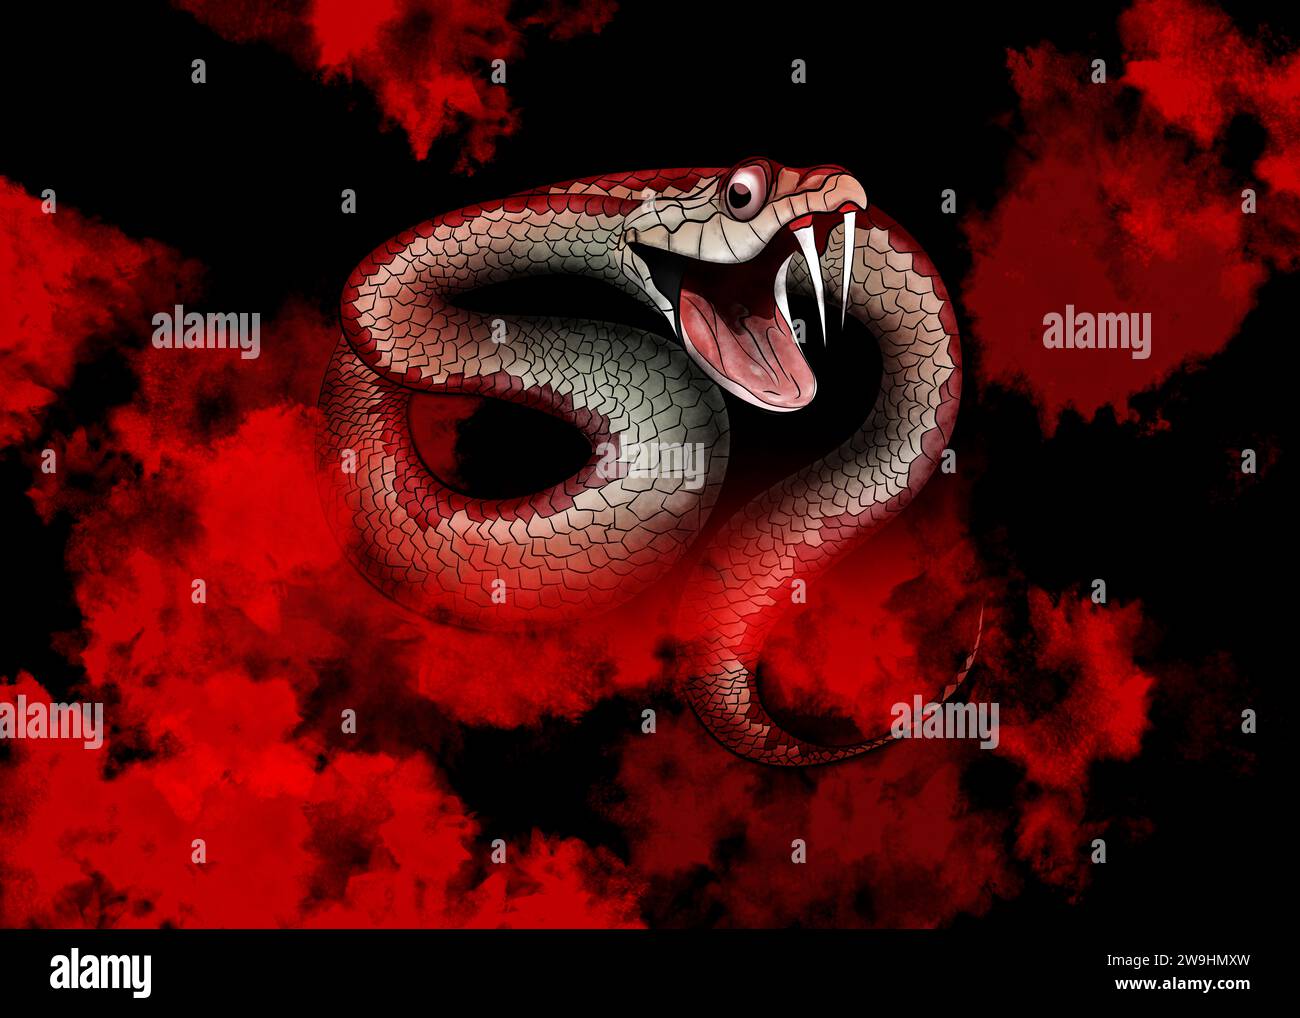 snake drawing on dark background with blue tones Stock Photo